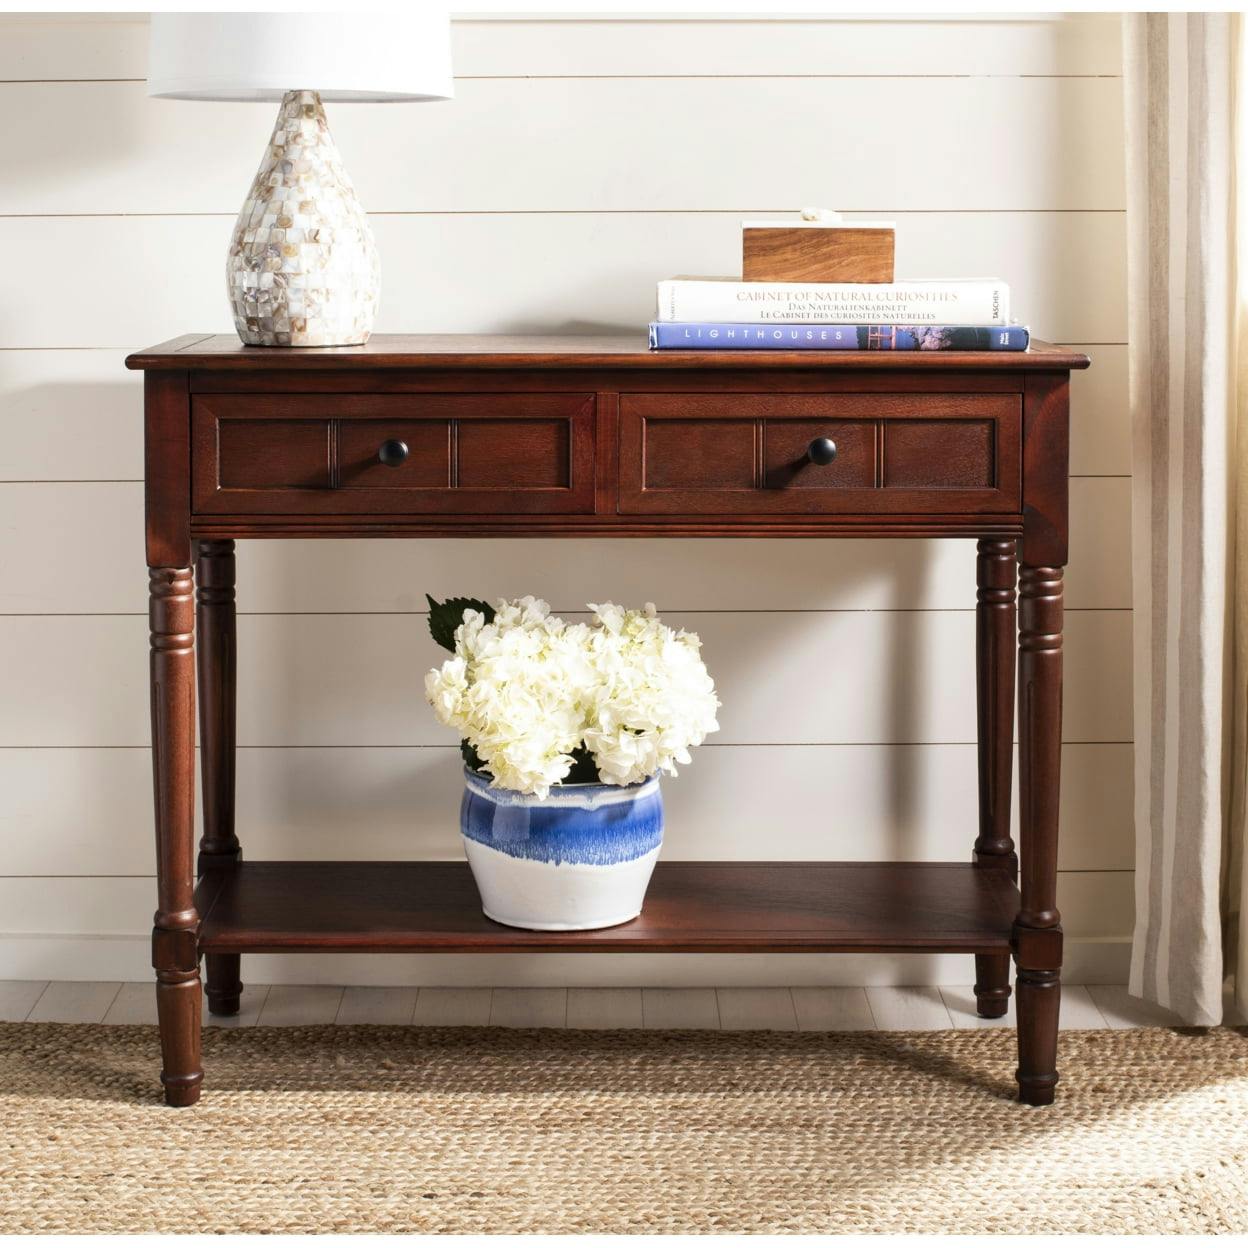 Transitional Dark Cherry Wood & Metal Console Table with Storage